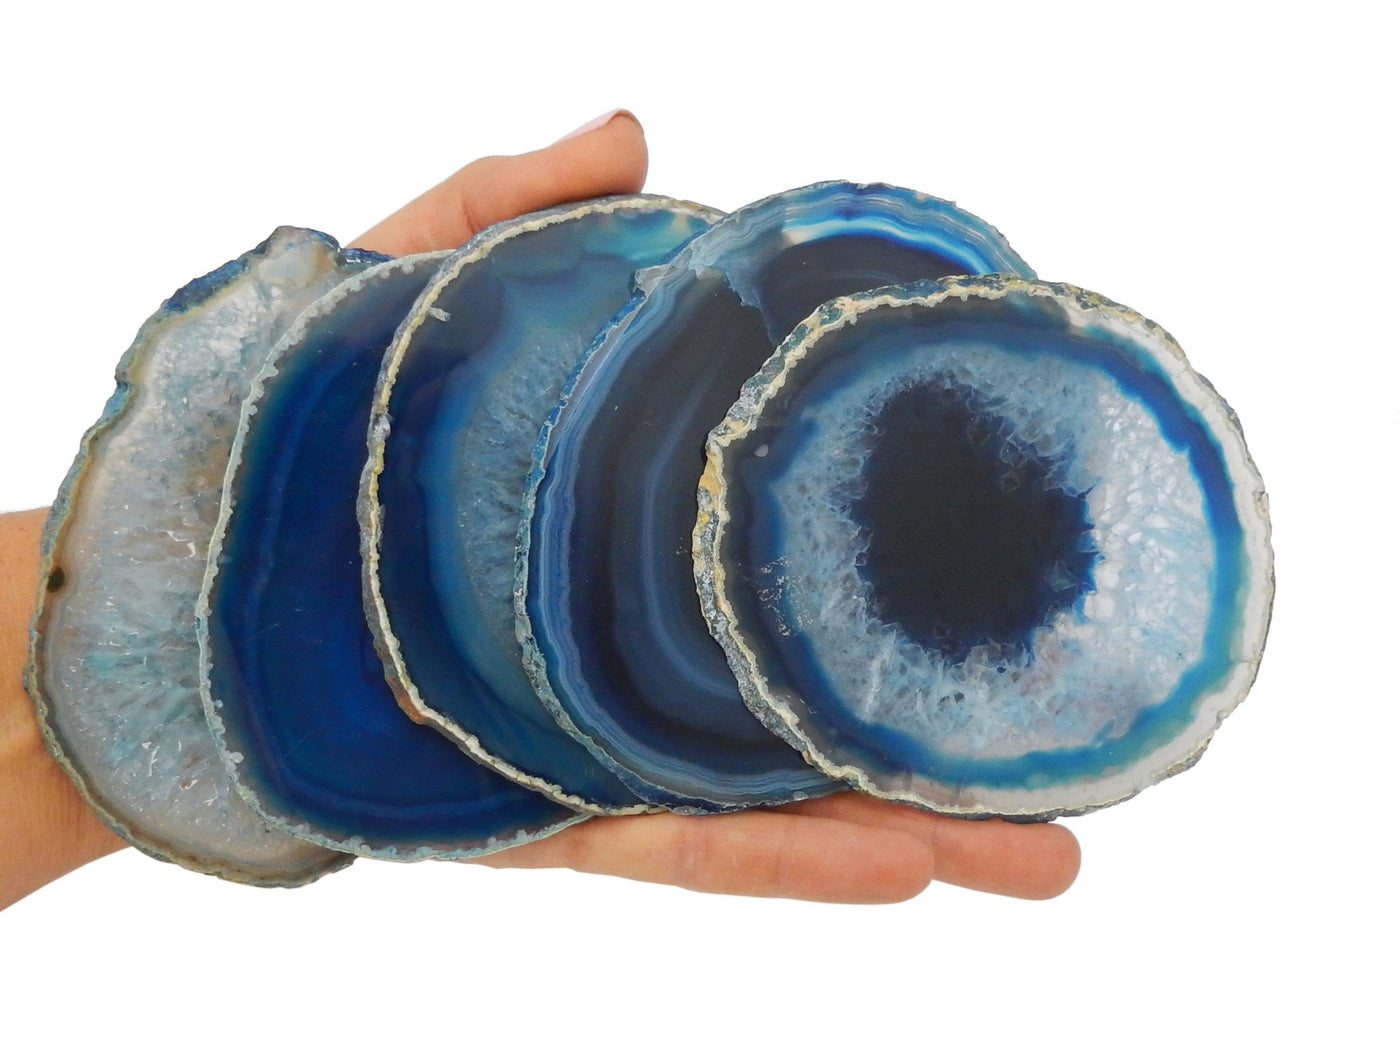 Blue Agate Slices in size #4 displayed in hand for size reference